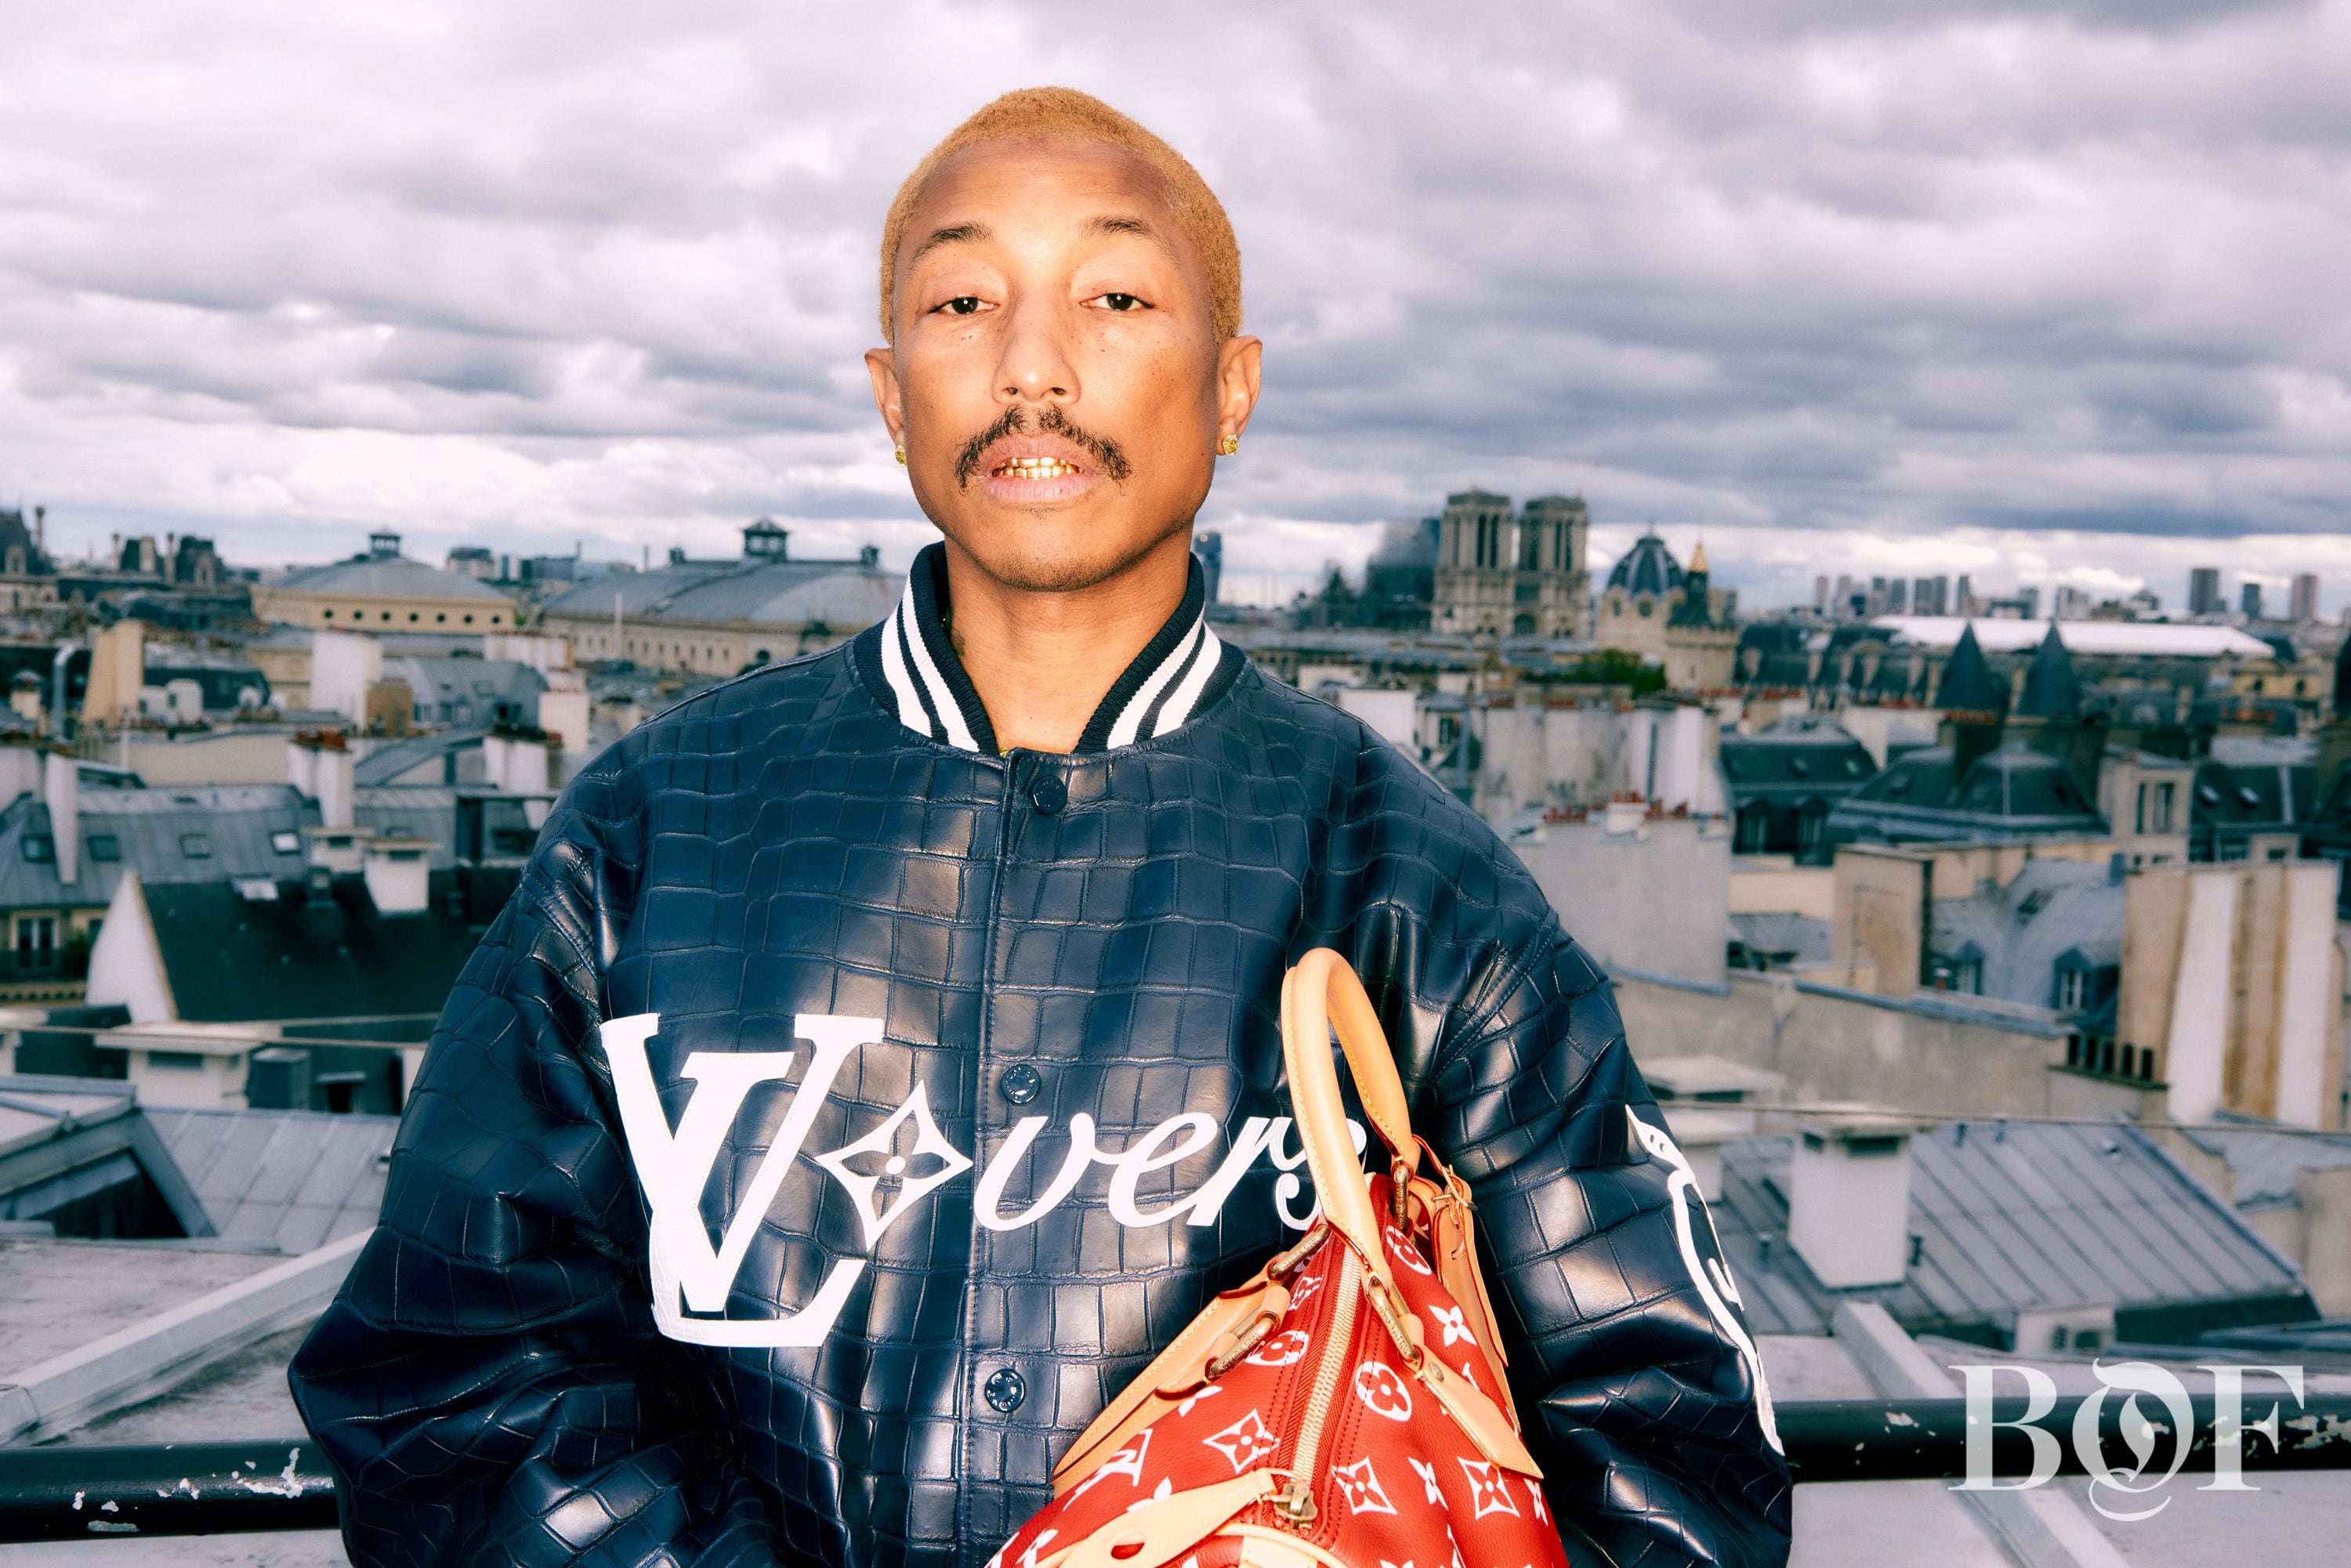 Louis Vuitton drops new collection under Pharrel's new direction